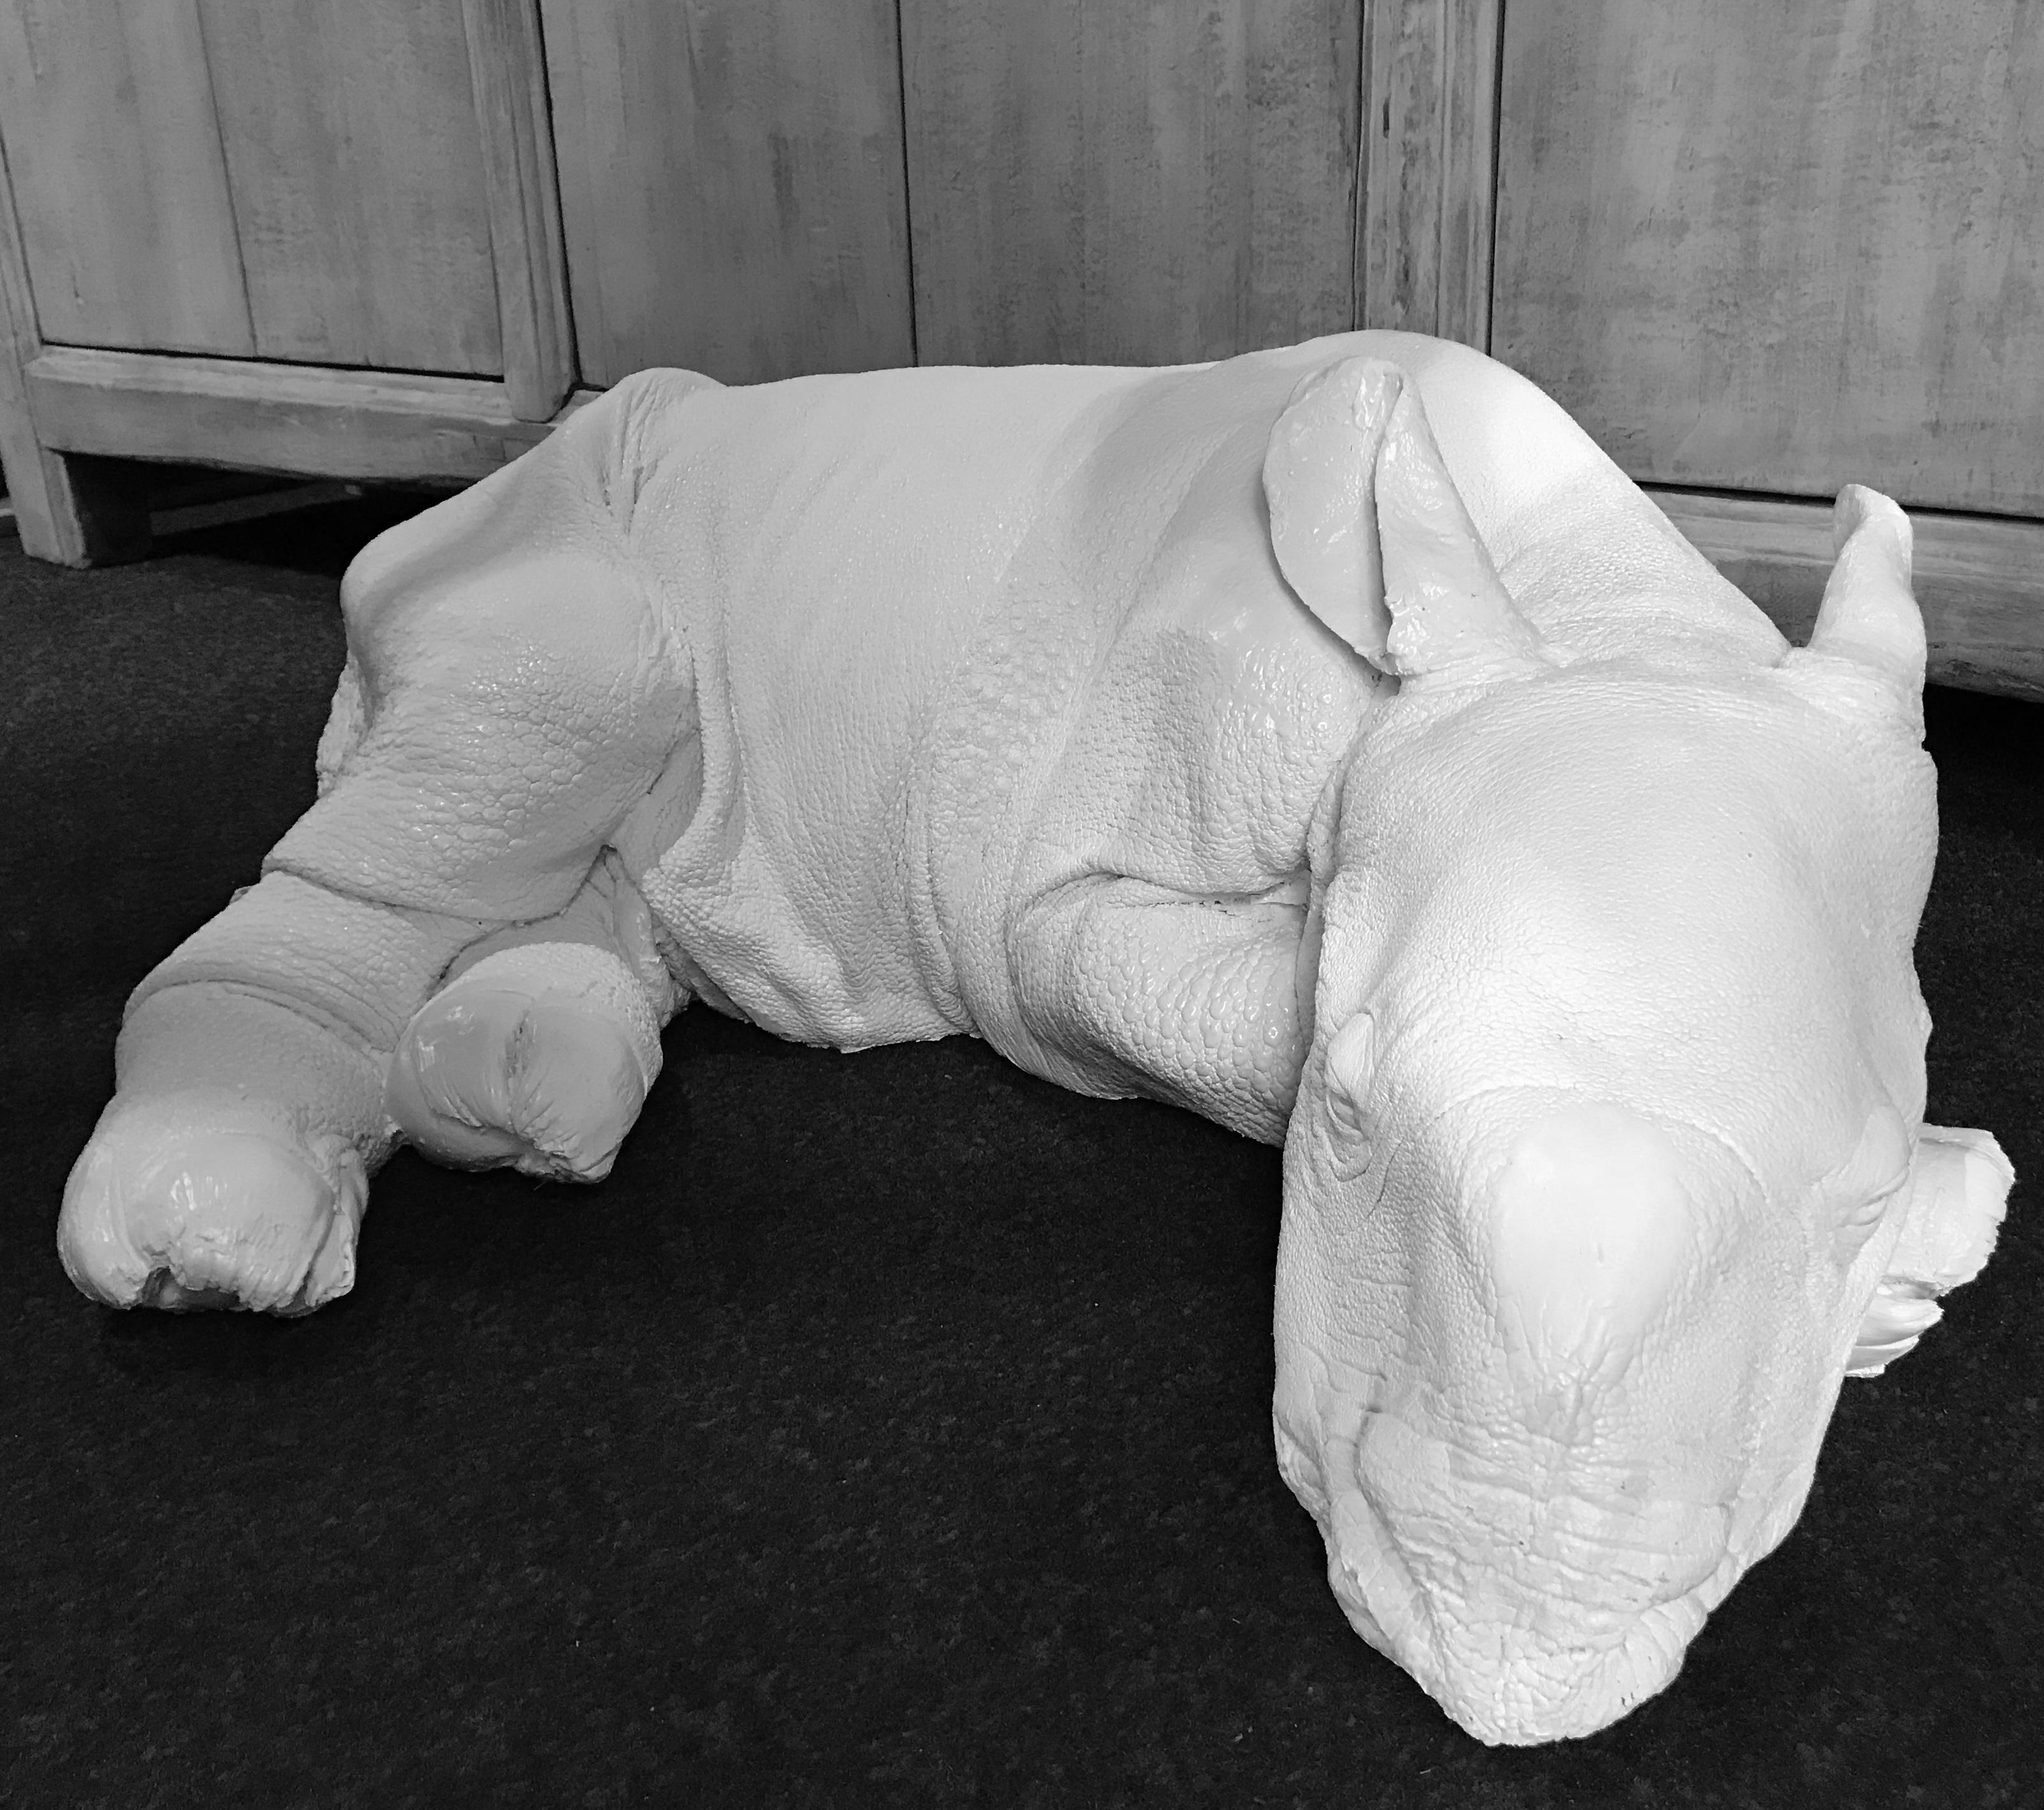 Lifelike white replica of a rhino calf. The calf has all the details and can not be distinguished from real.